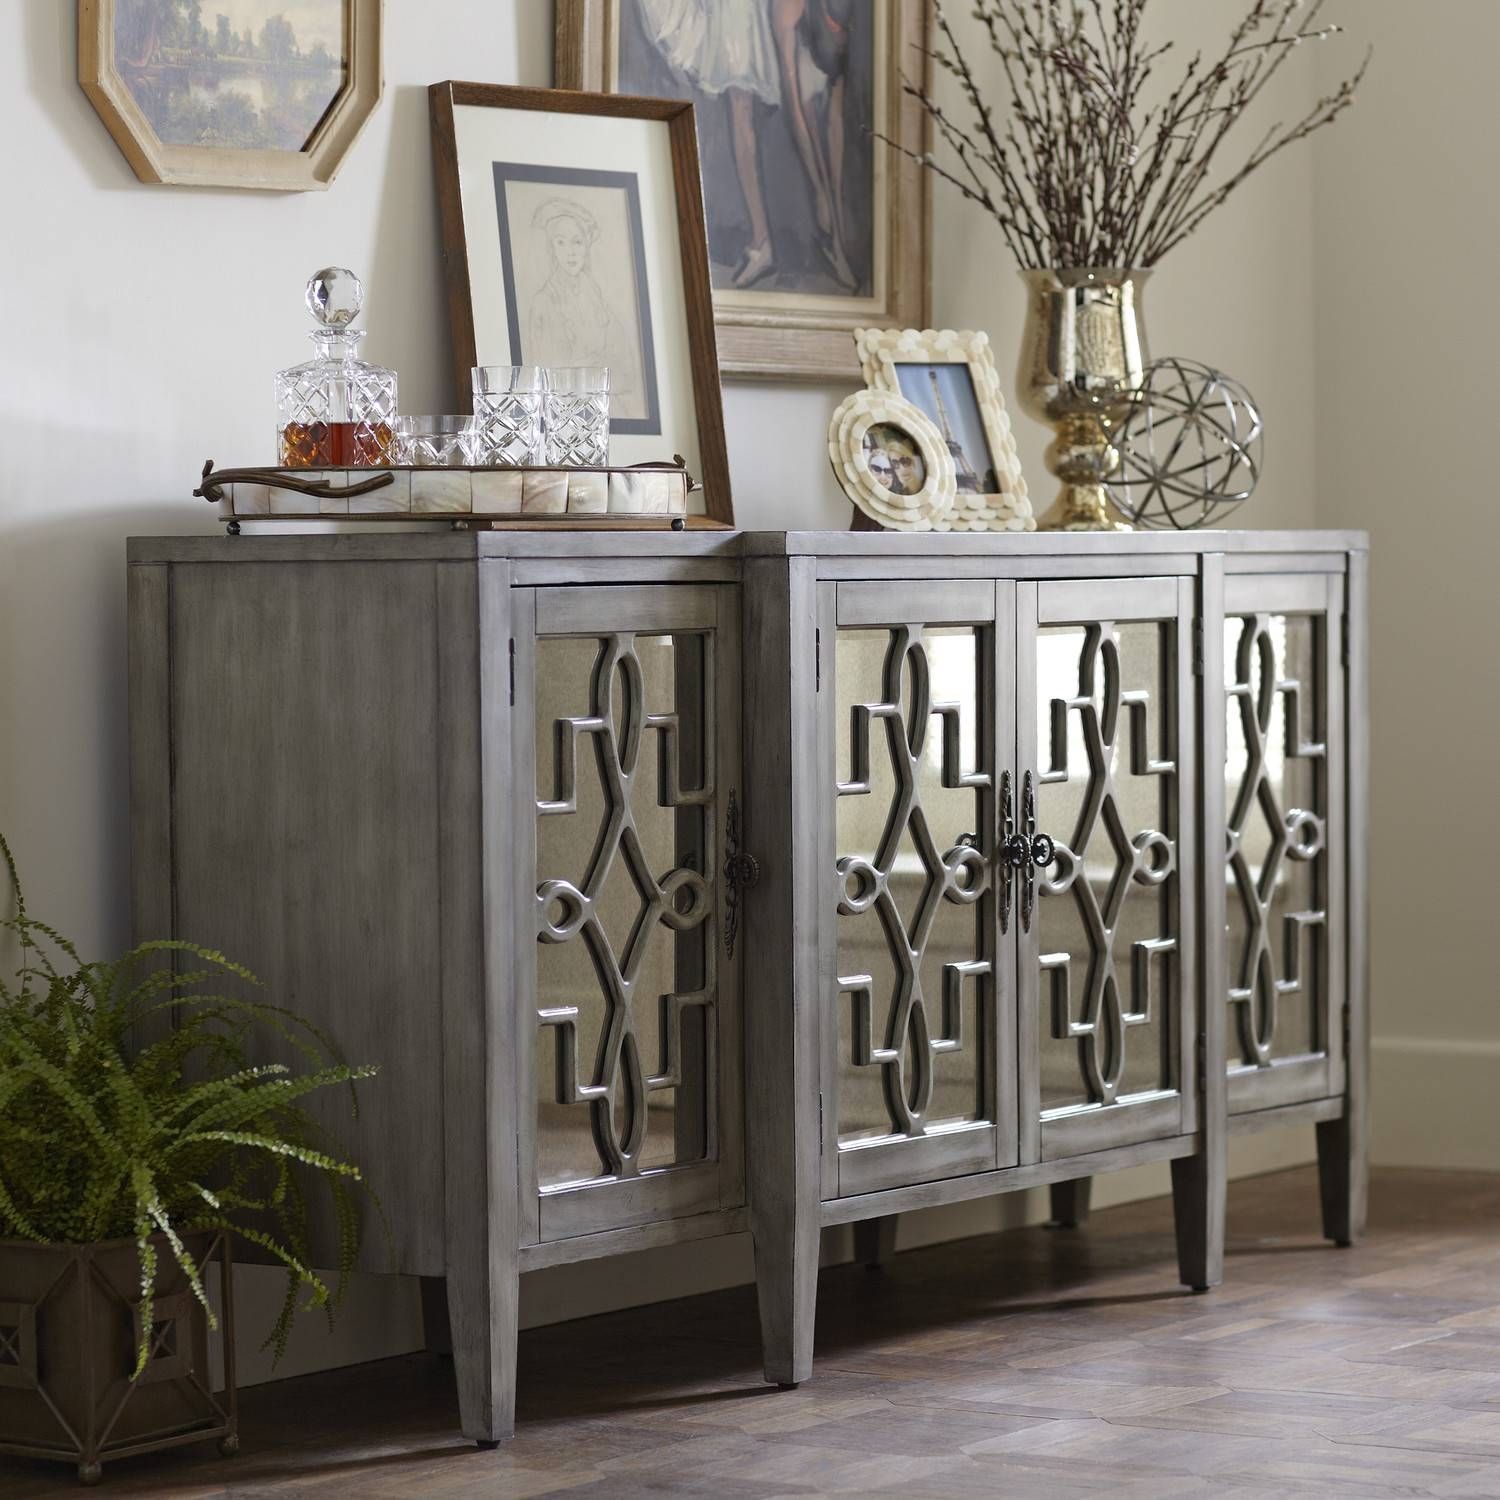 Lovely Mirrored Buffet Sideboard – Bjdgjy Intended For Most Recent Mirrored Buffet Sideboards (View 5 of 15)